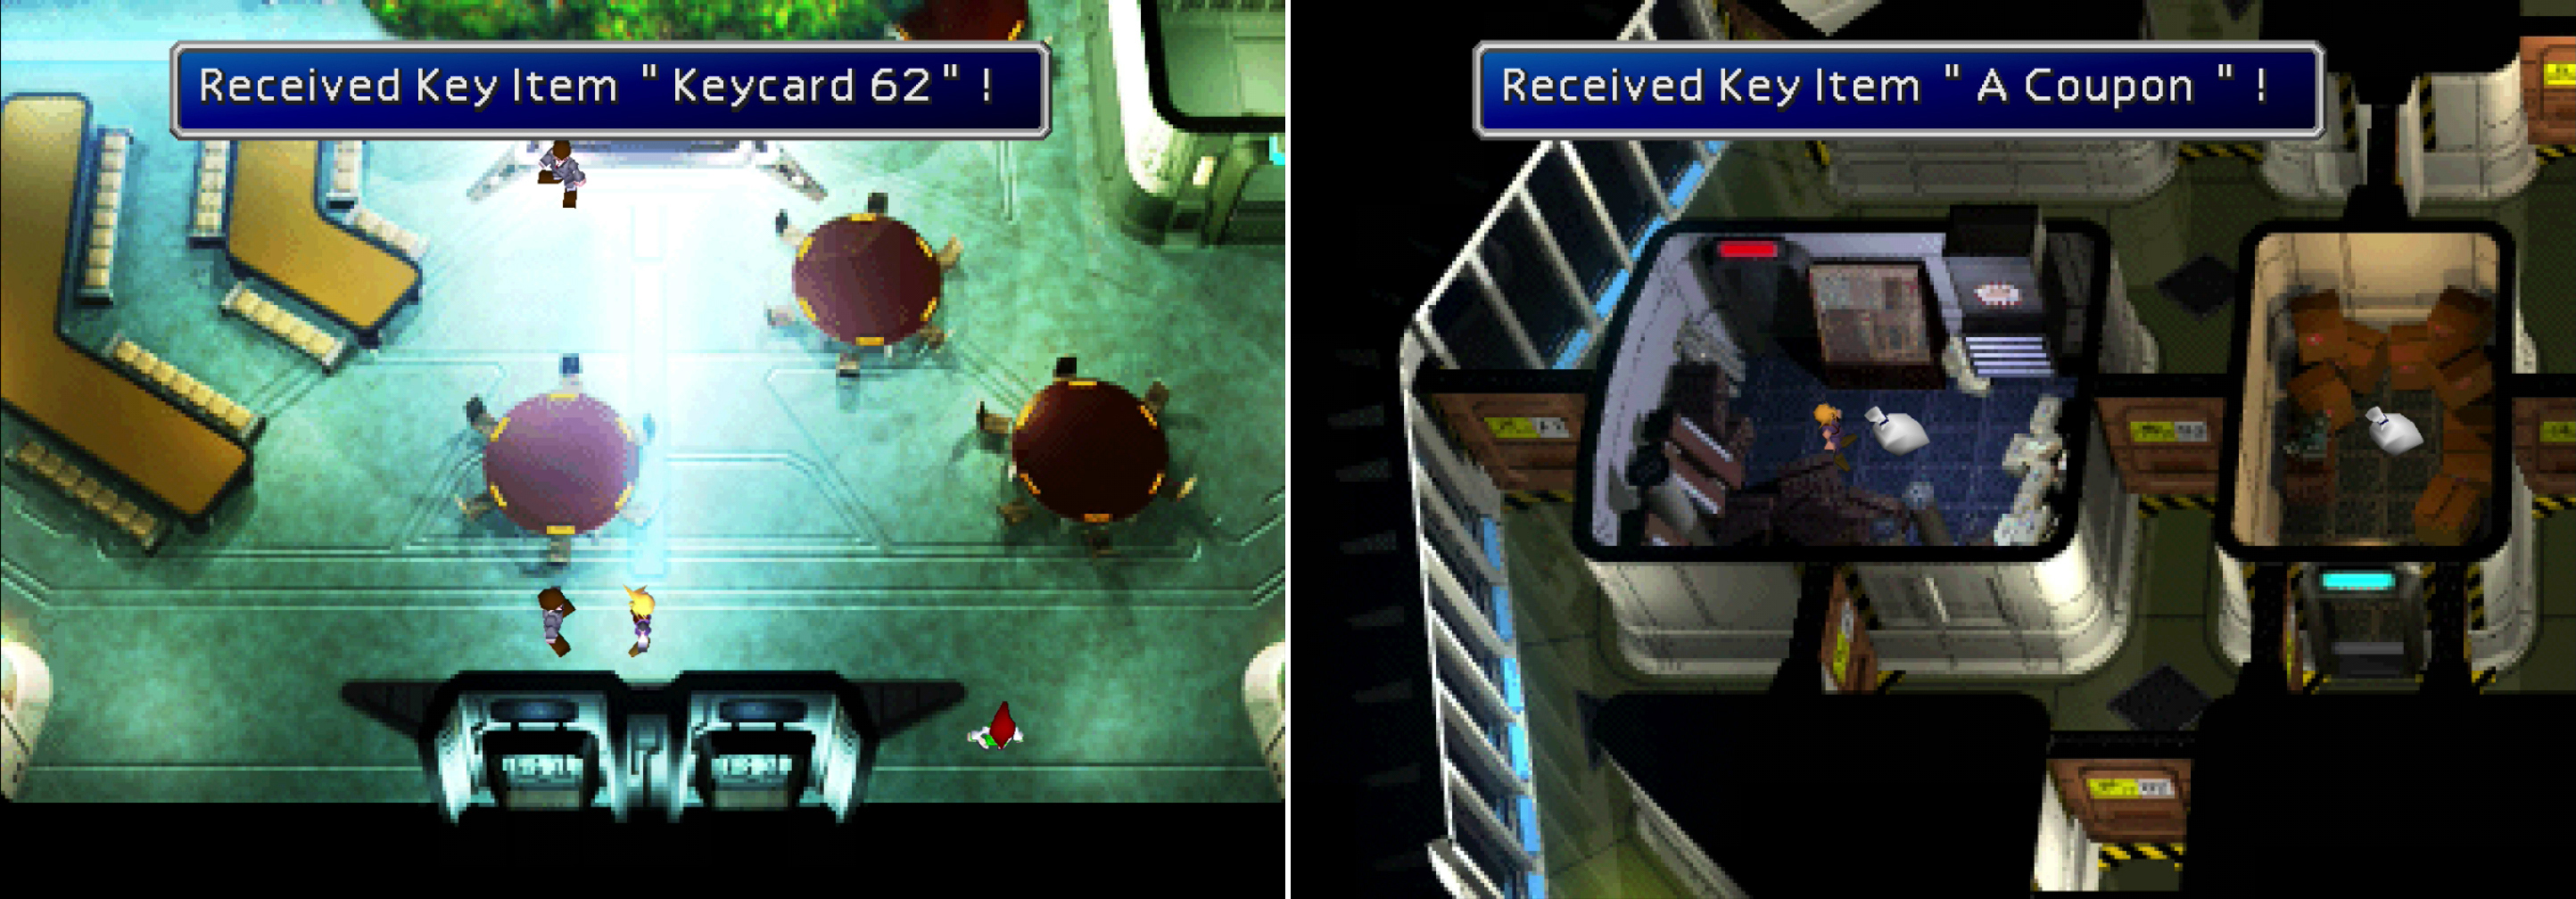 ff7-63rd-floor-password-review-home-decor